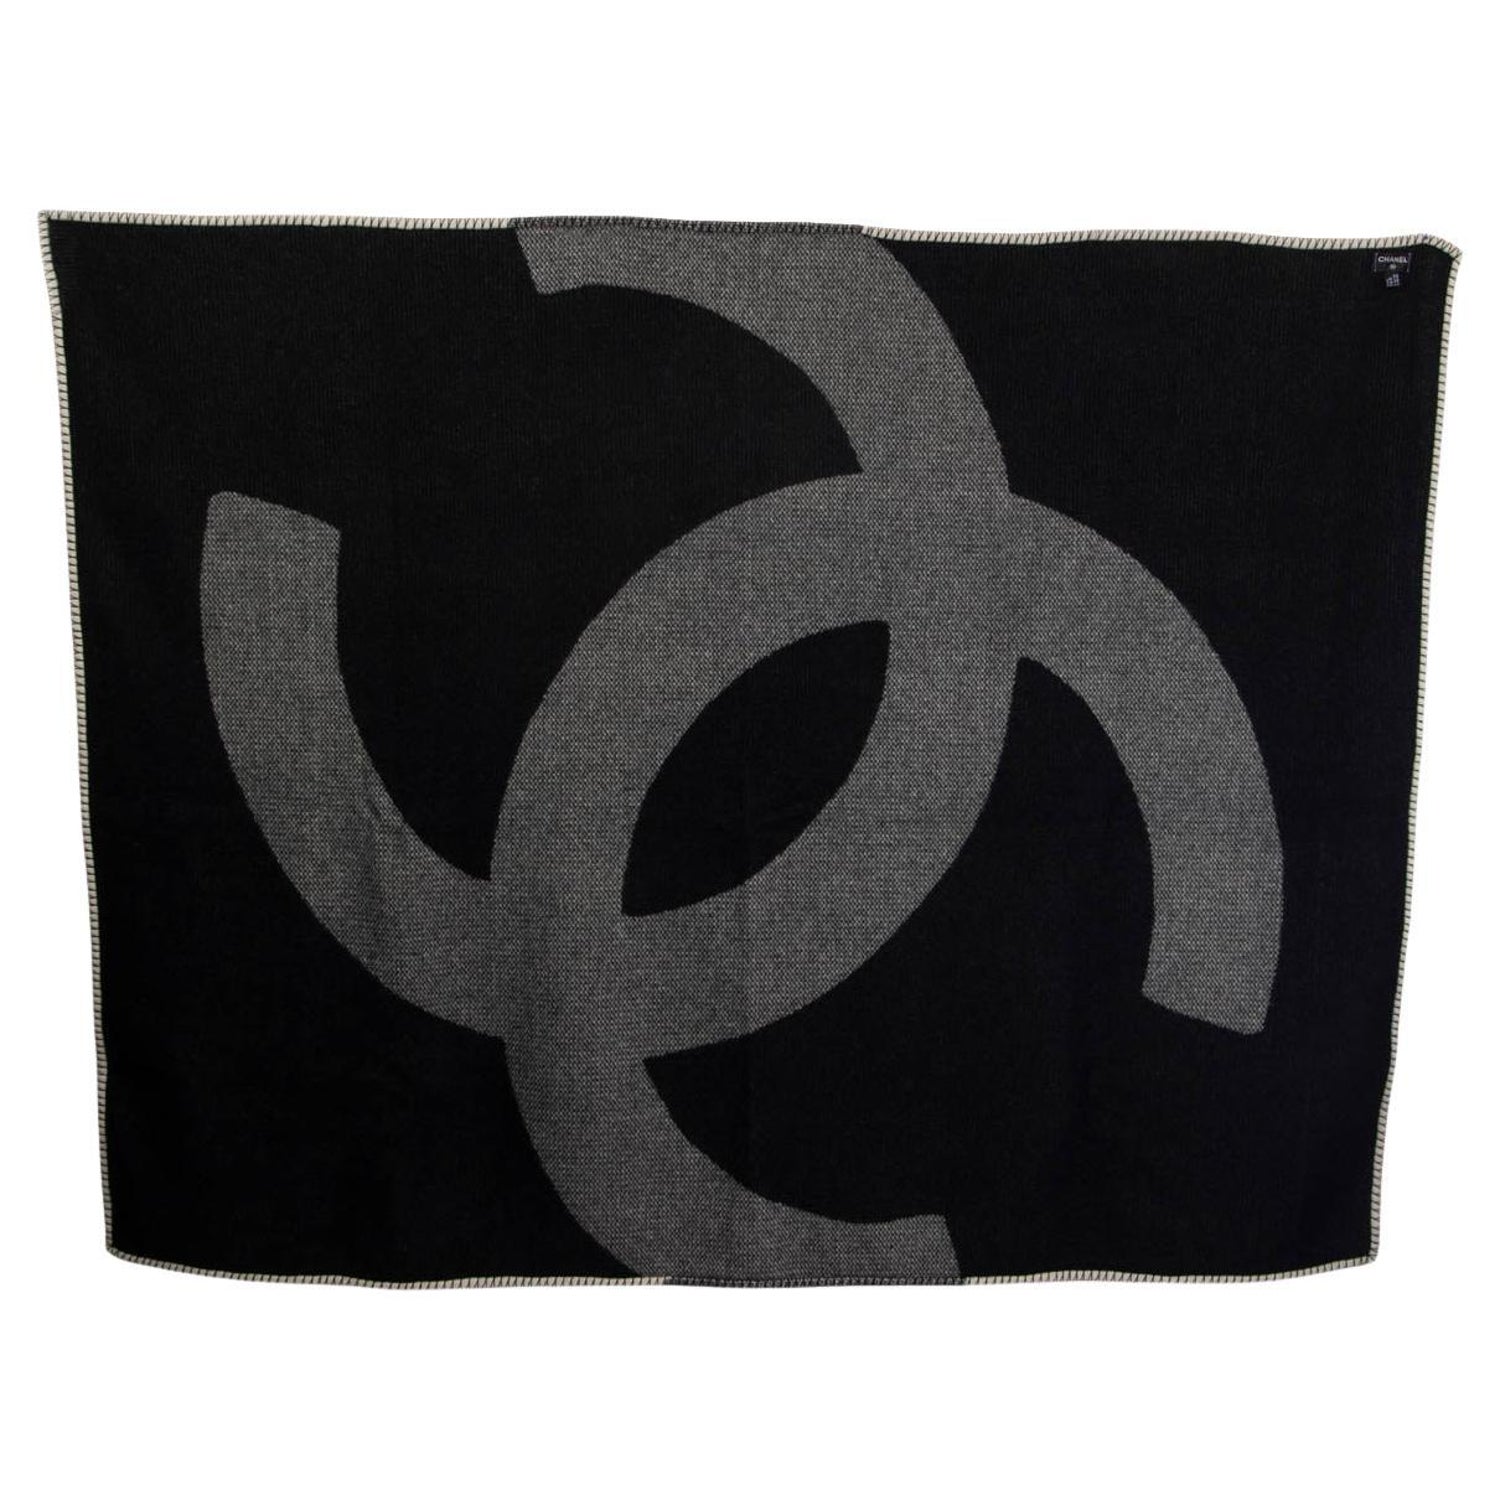 Vintage Chanel Pillows and Throws - 7 For Sale at 1stDibs  chanel pillows  for couch, chanel throw, chanel neck pillow